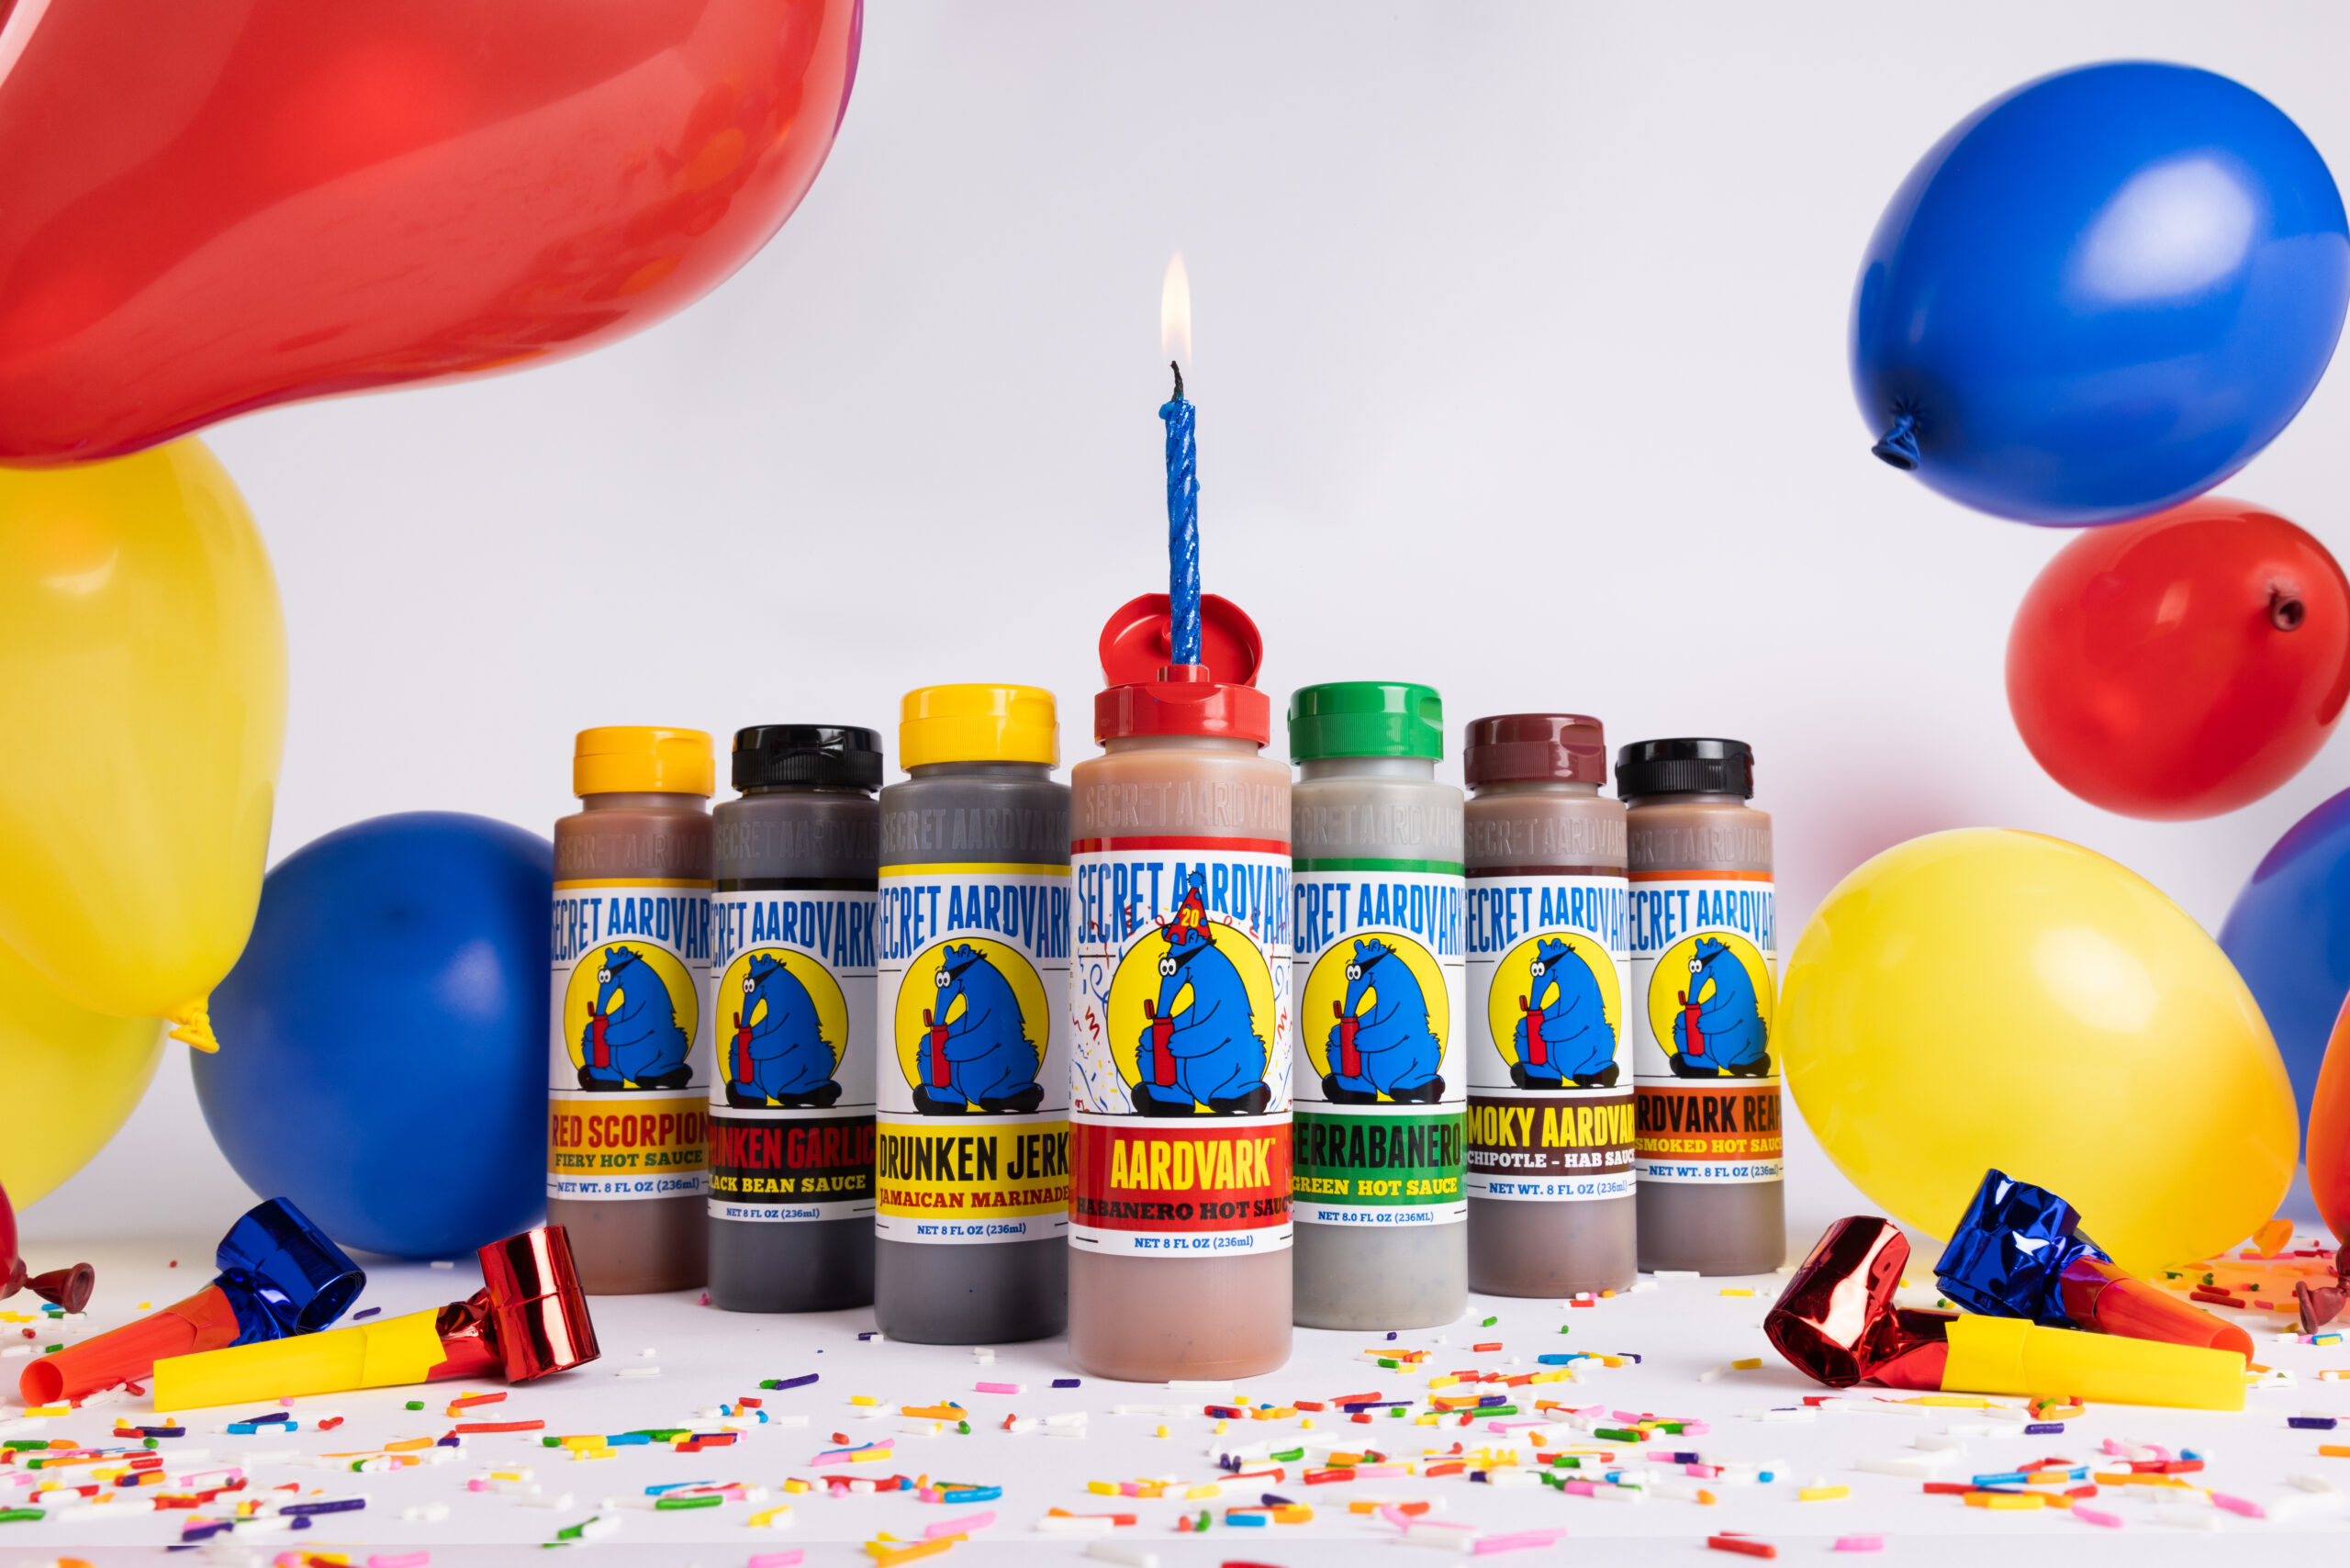 All 7 Aardvark sauce sand marinades on a table with a birthday candle, balloons, and confetti.